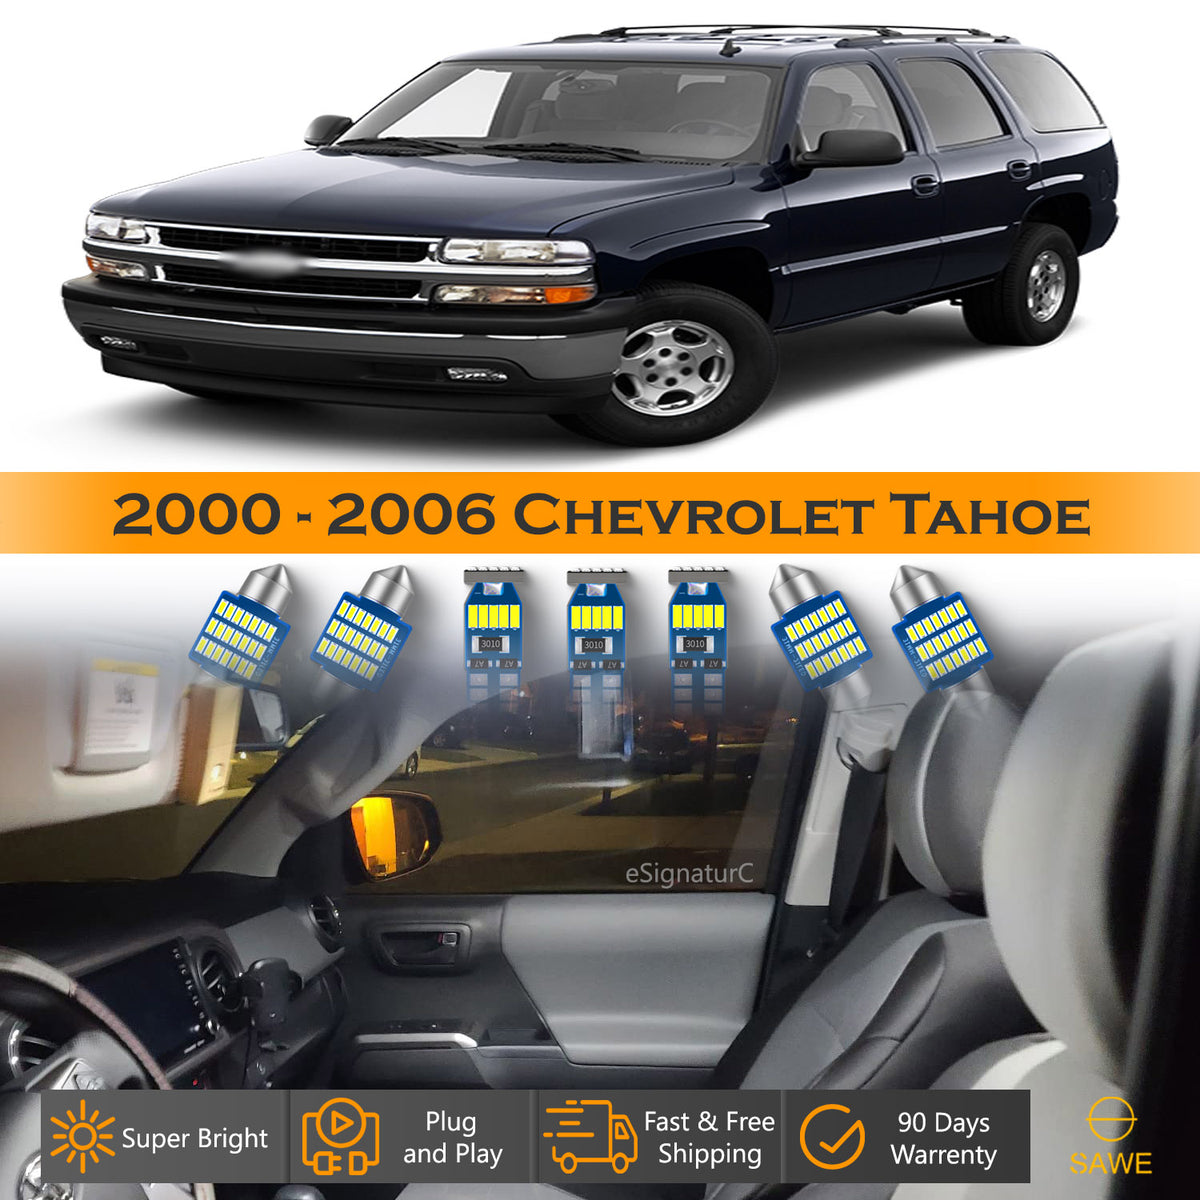 For Chevrolet Tahoe Interior LED Lights - Dome & Map Lights Package Kit for 2000 - 2006 - White